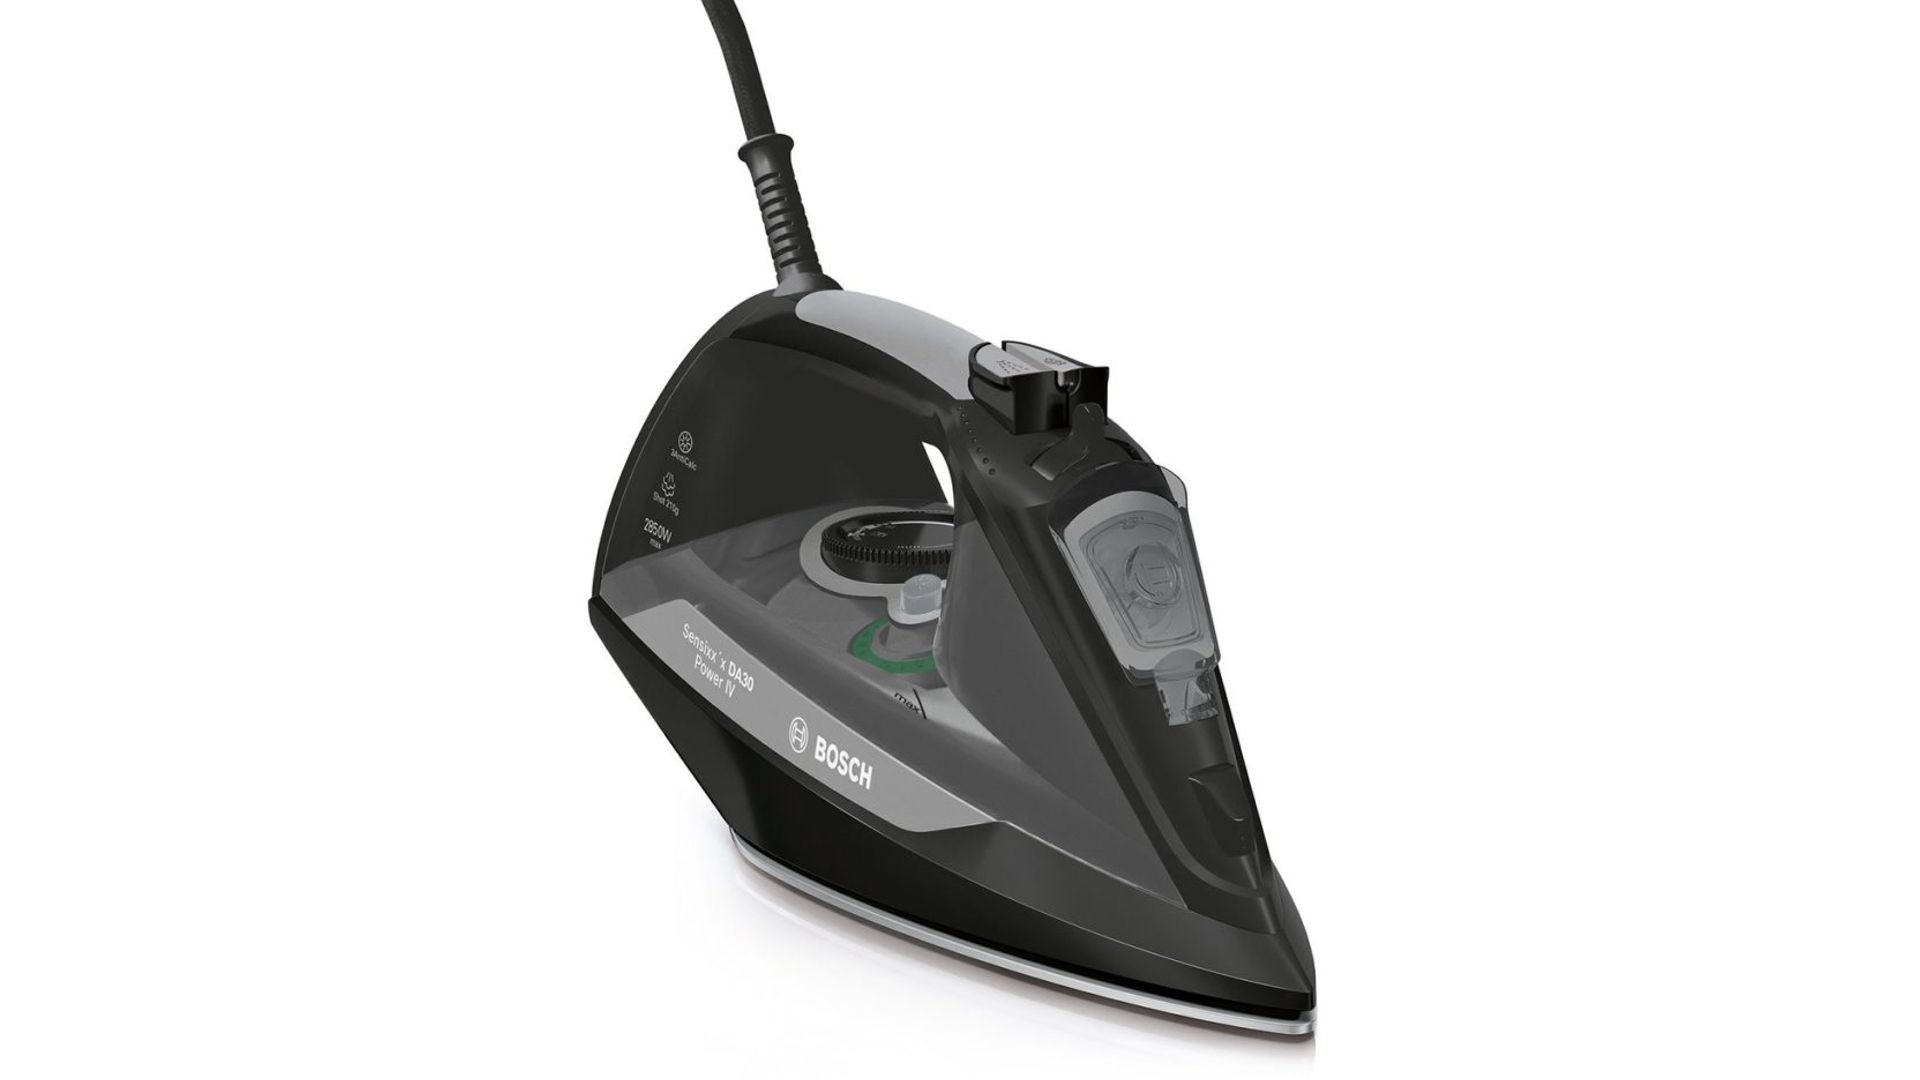 Best iron or steam generator for easy crease removal | T3